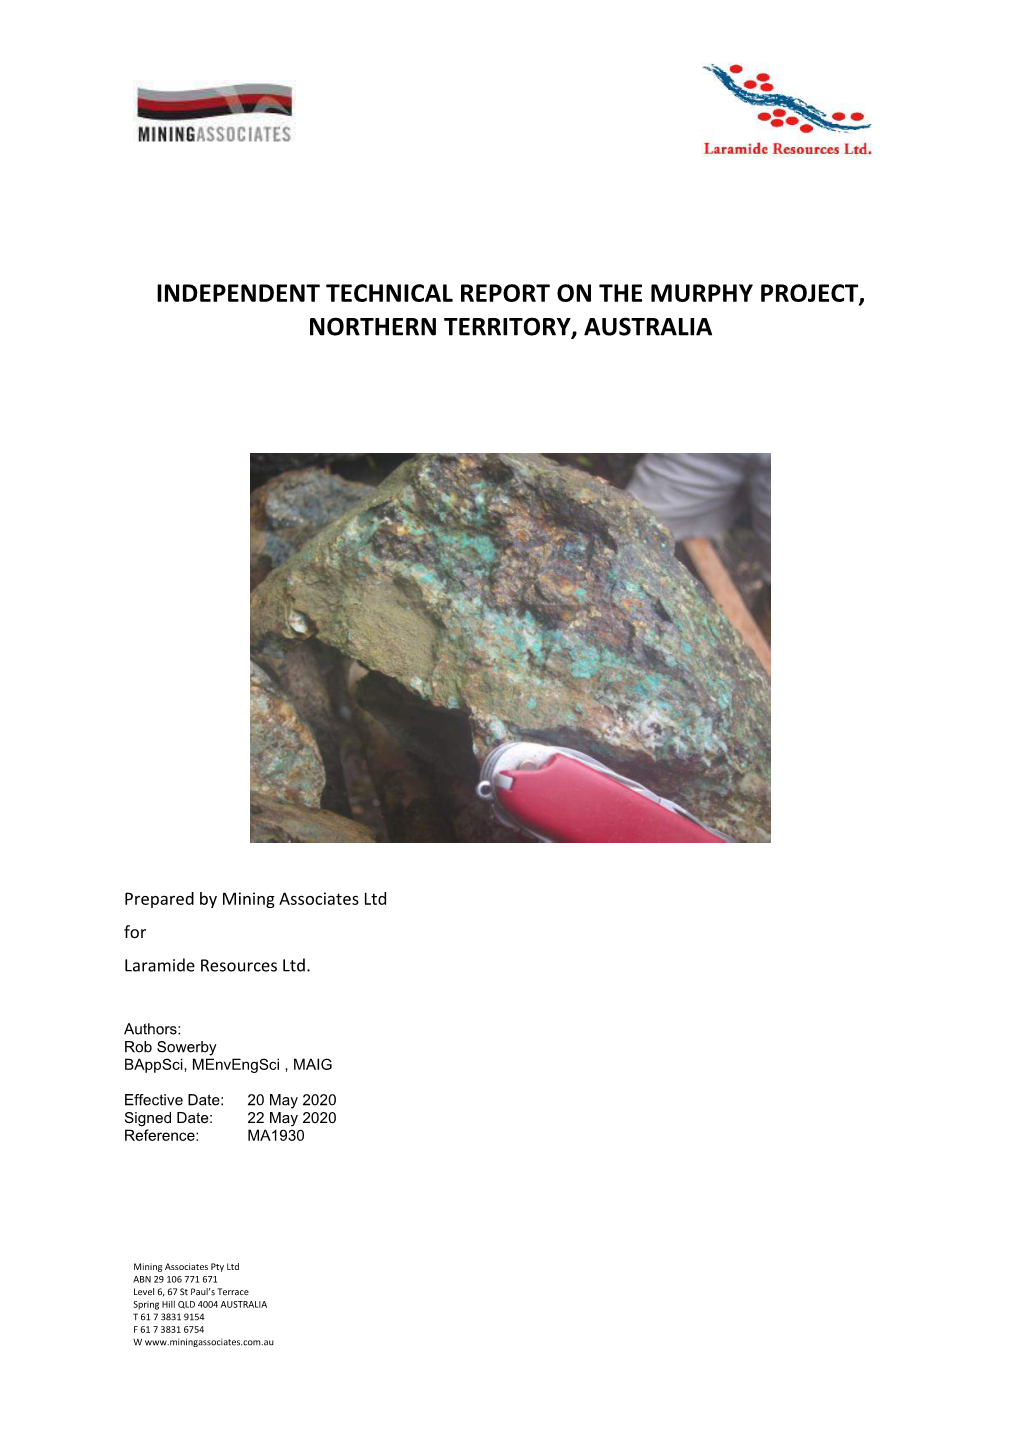 Independent Technical Report on the Murphy Project, Northern Territory, Australia